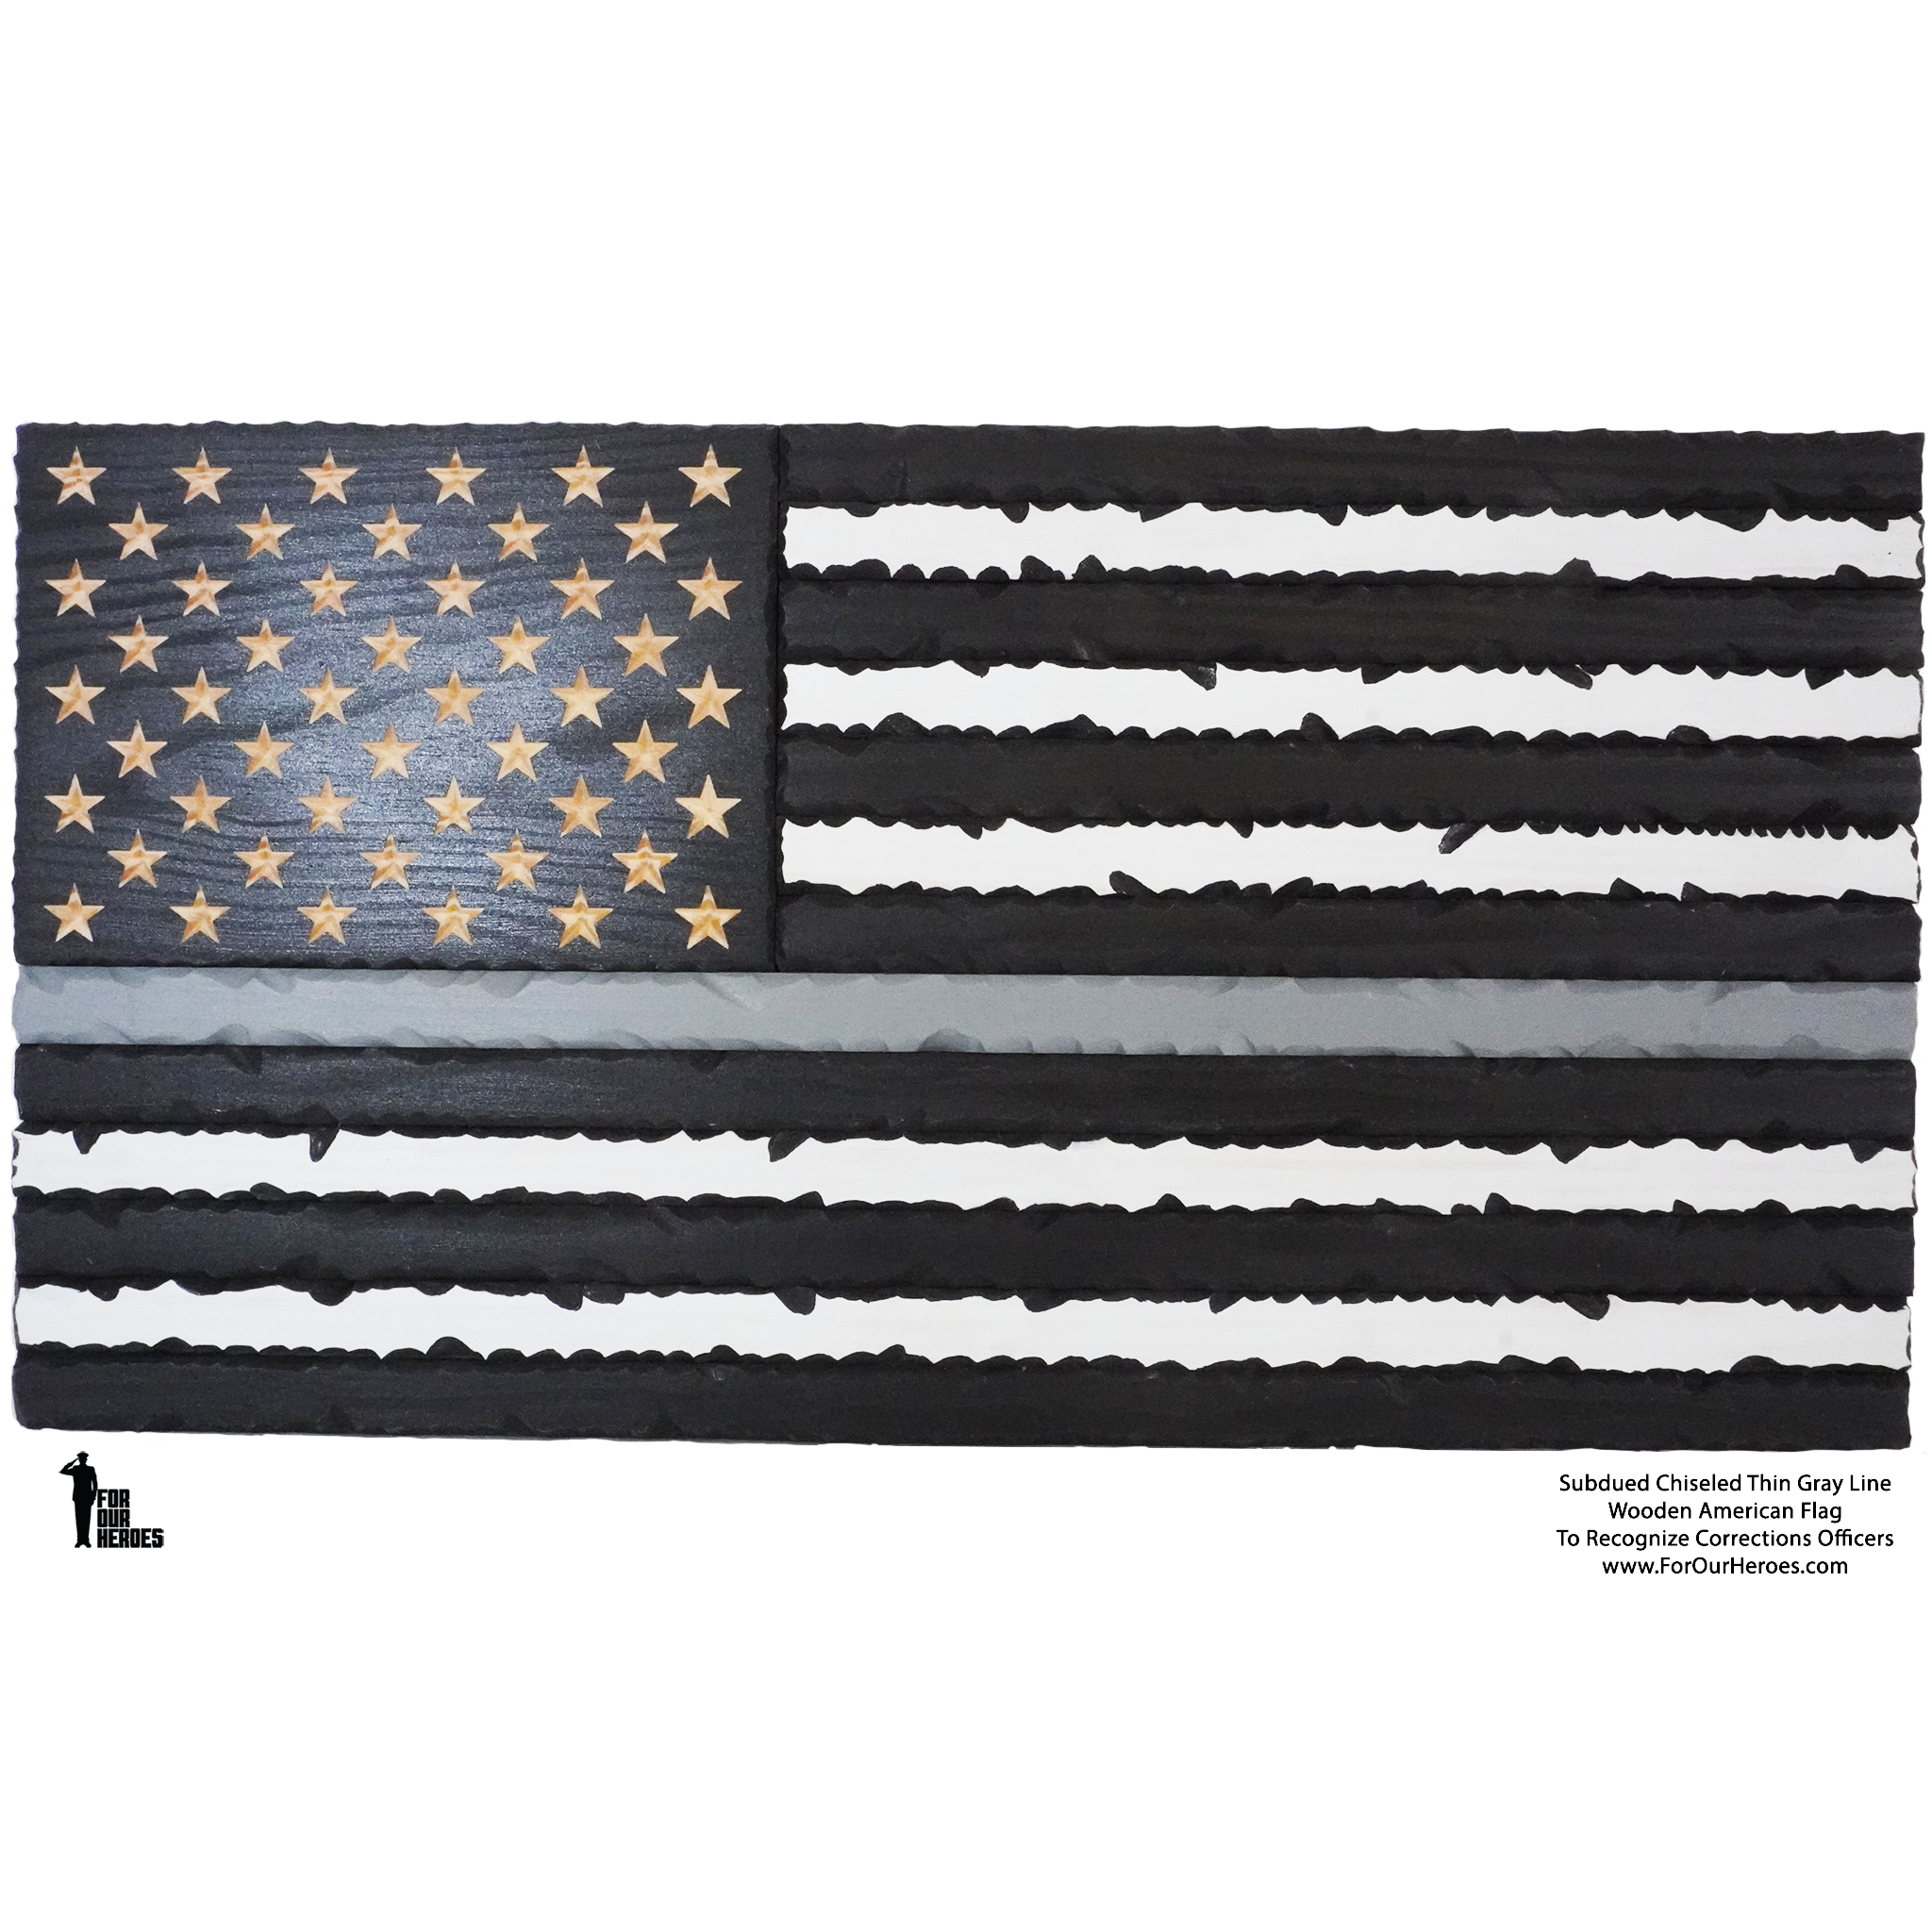 2D SUBDUED CHISELED THIN LINE American Flag (carved stars)